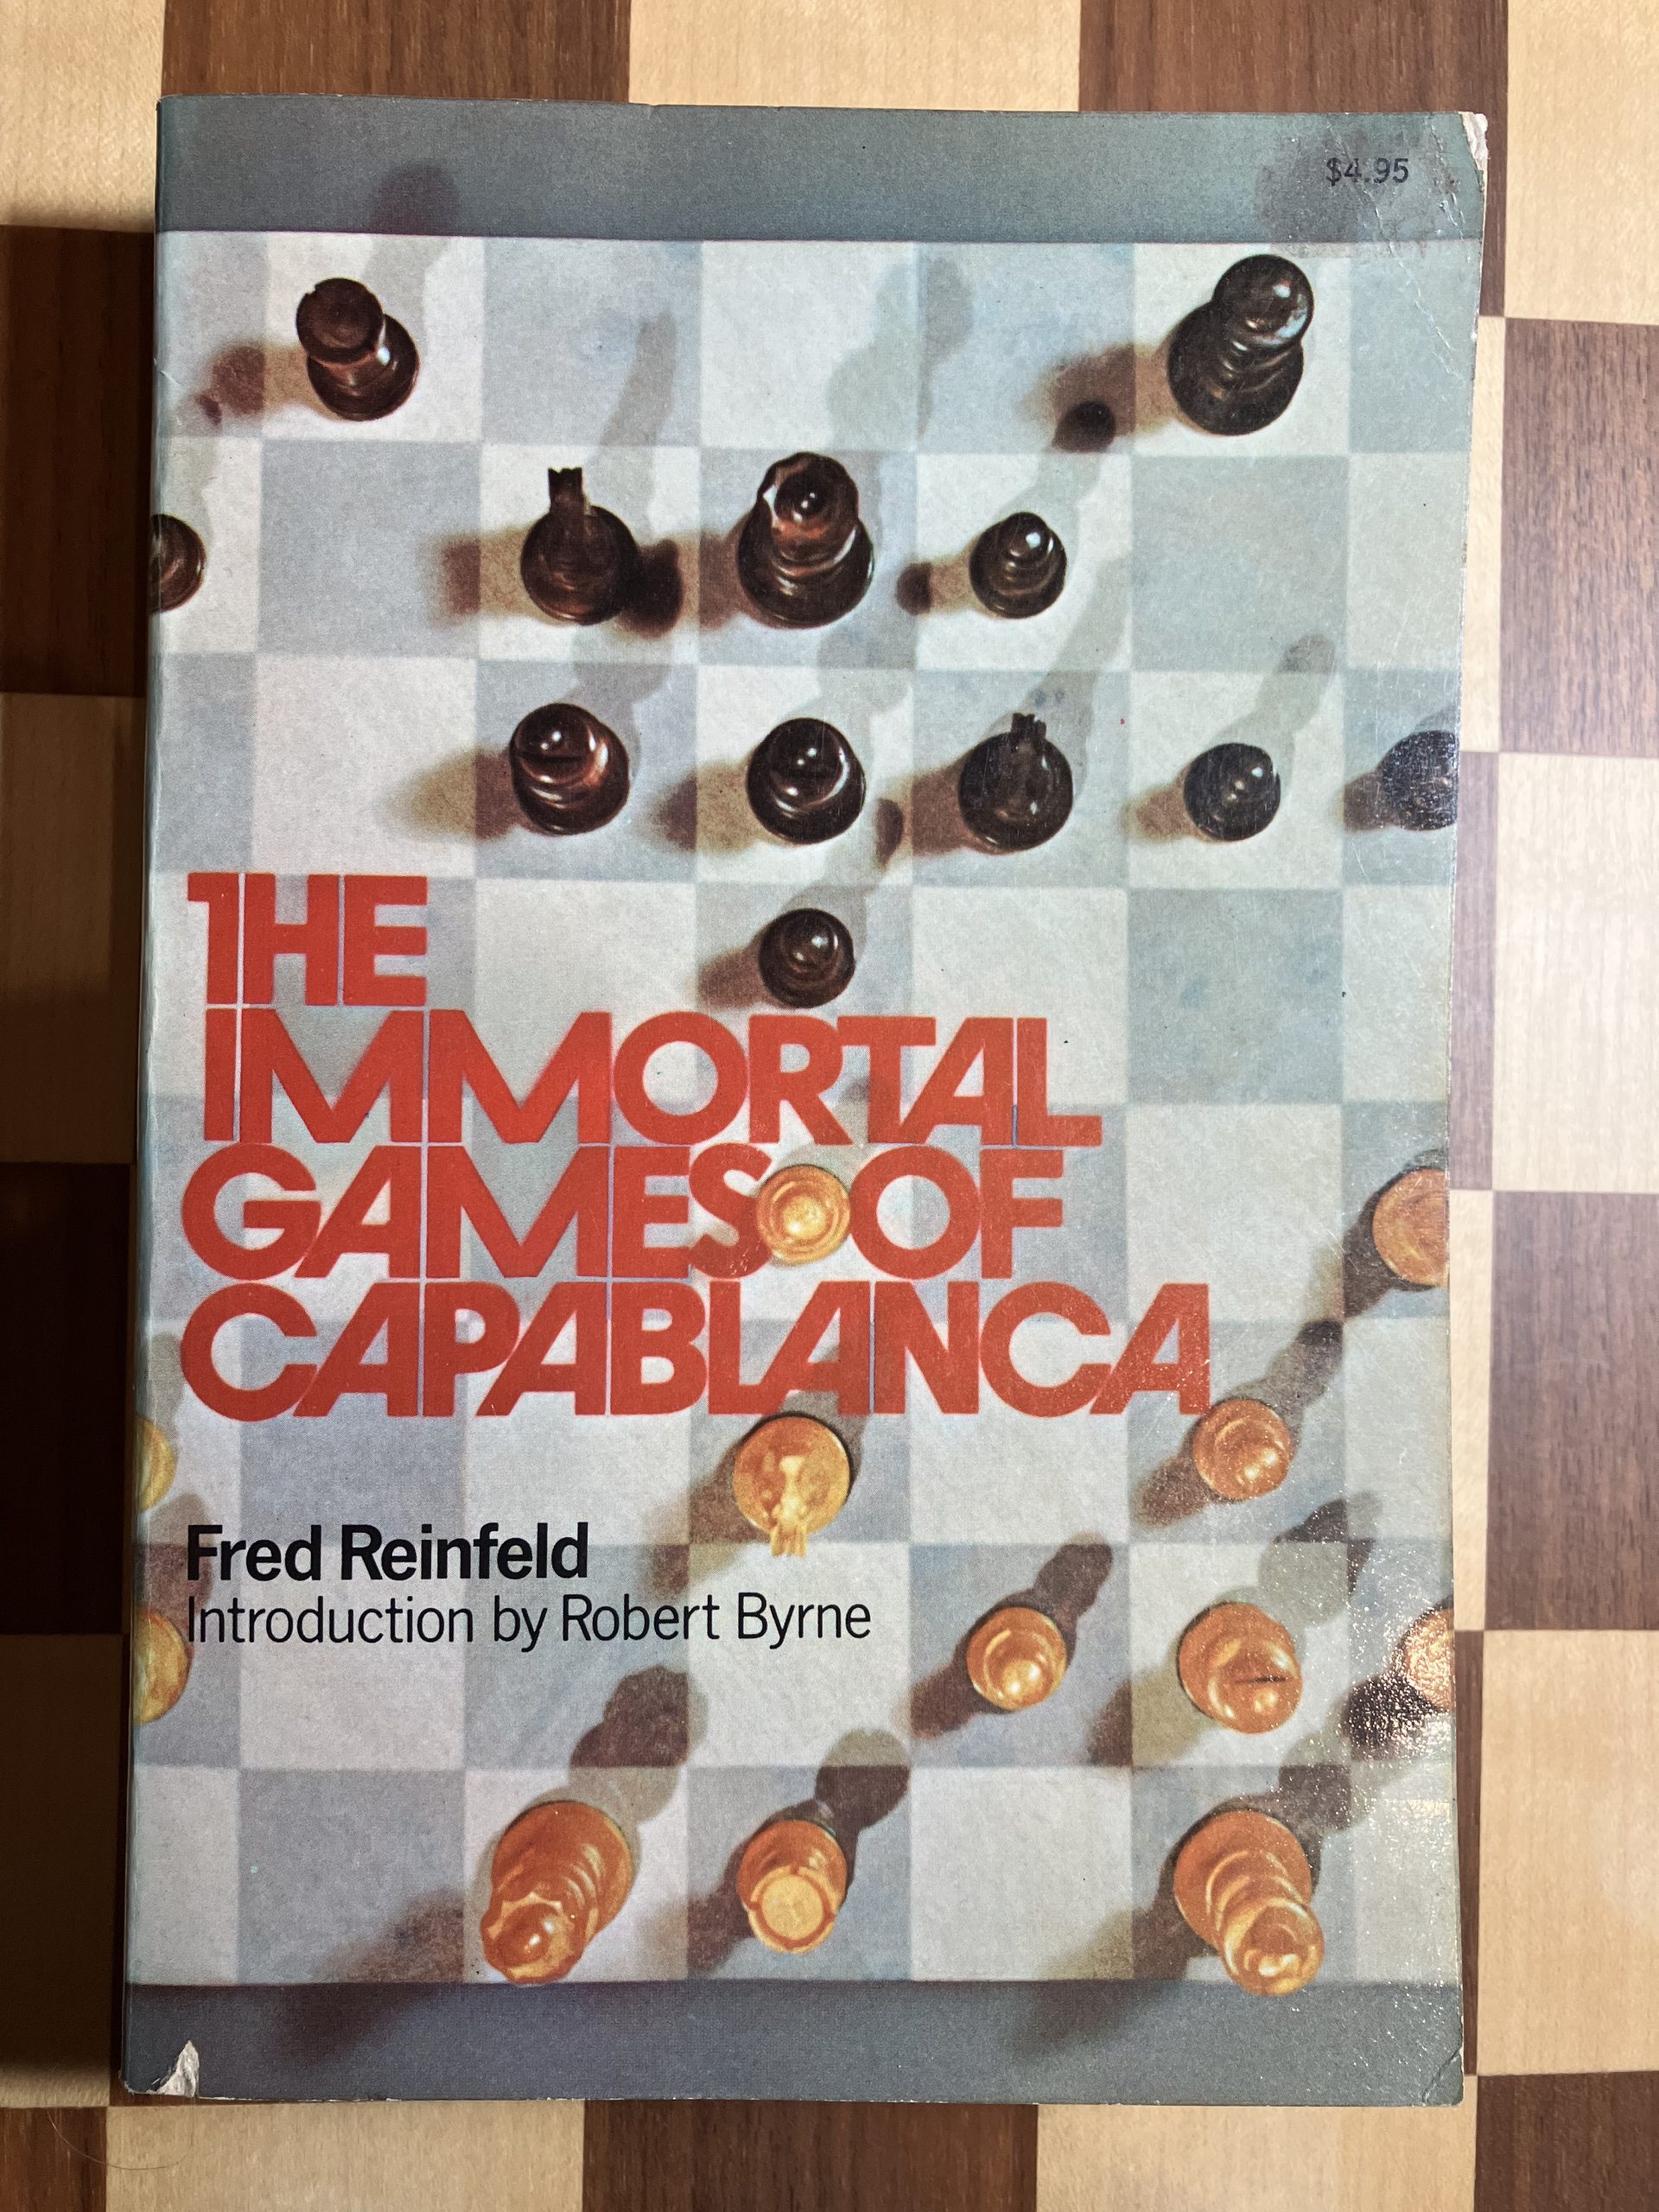 The Immortal Games of Capablanca, Fred Reinfeld, Collier Books, New York, 1974